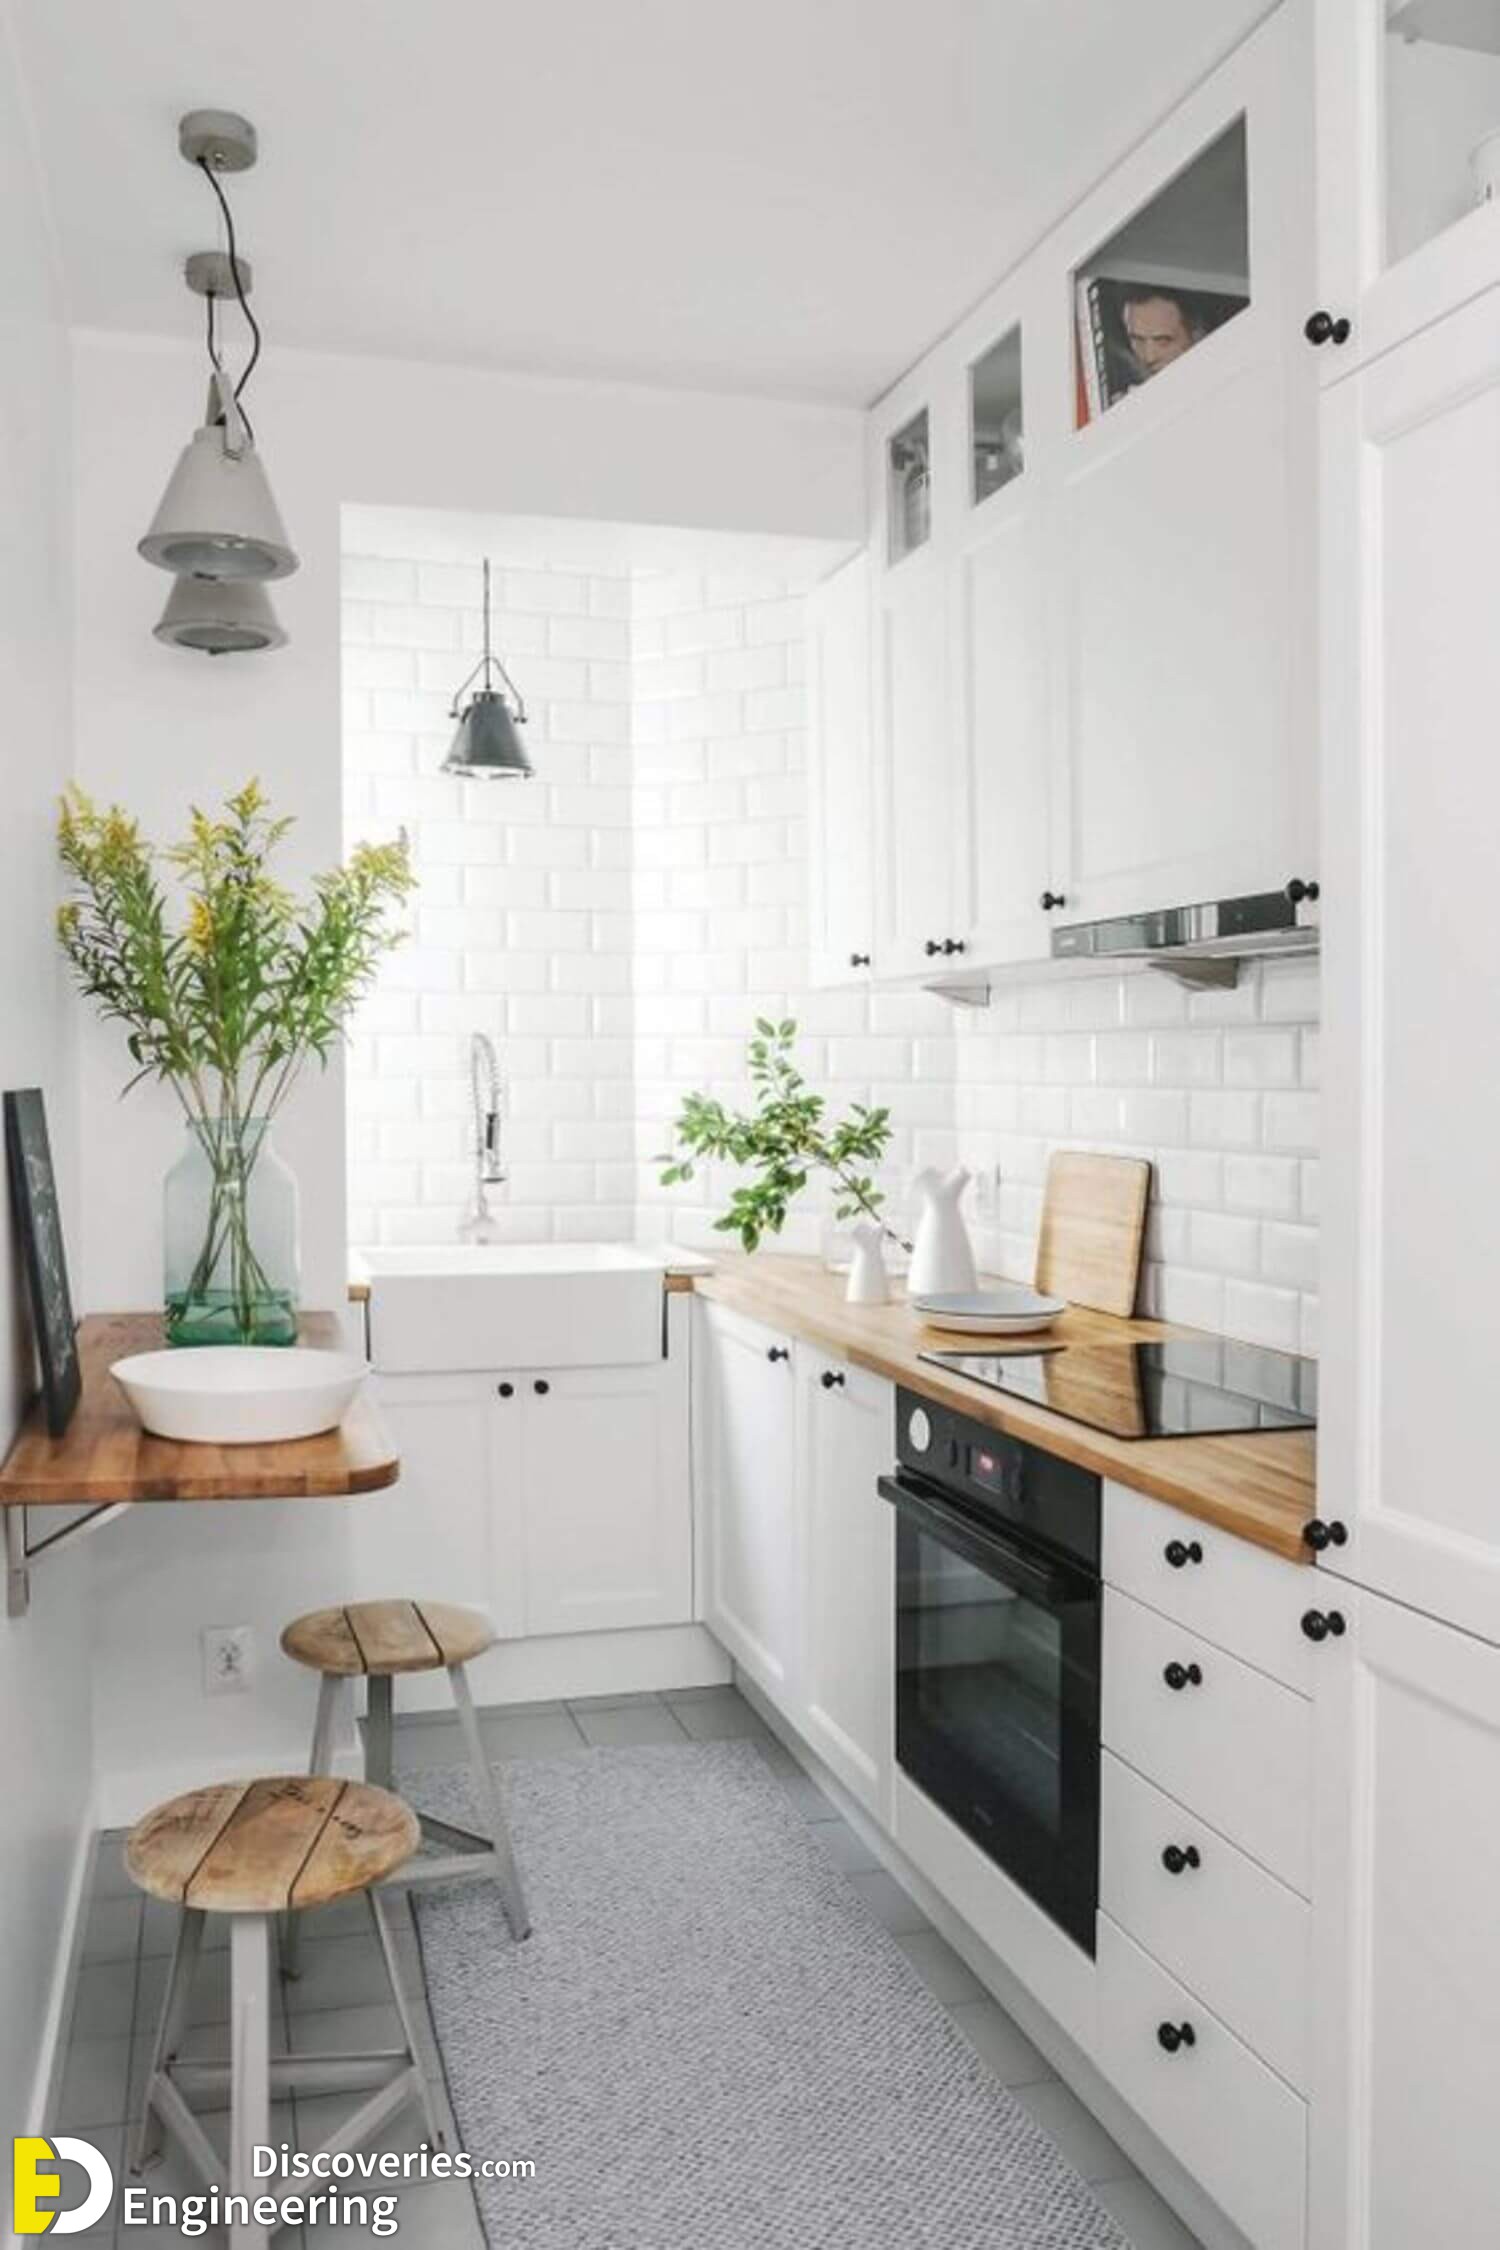 Unique Small Kitchen Ideas That You’ve Never Seen Before - Engineering ...